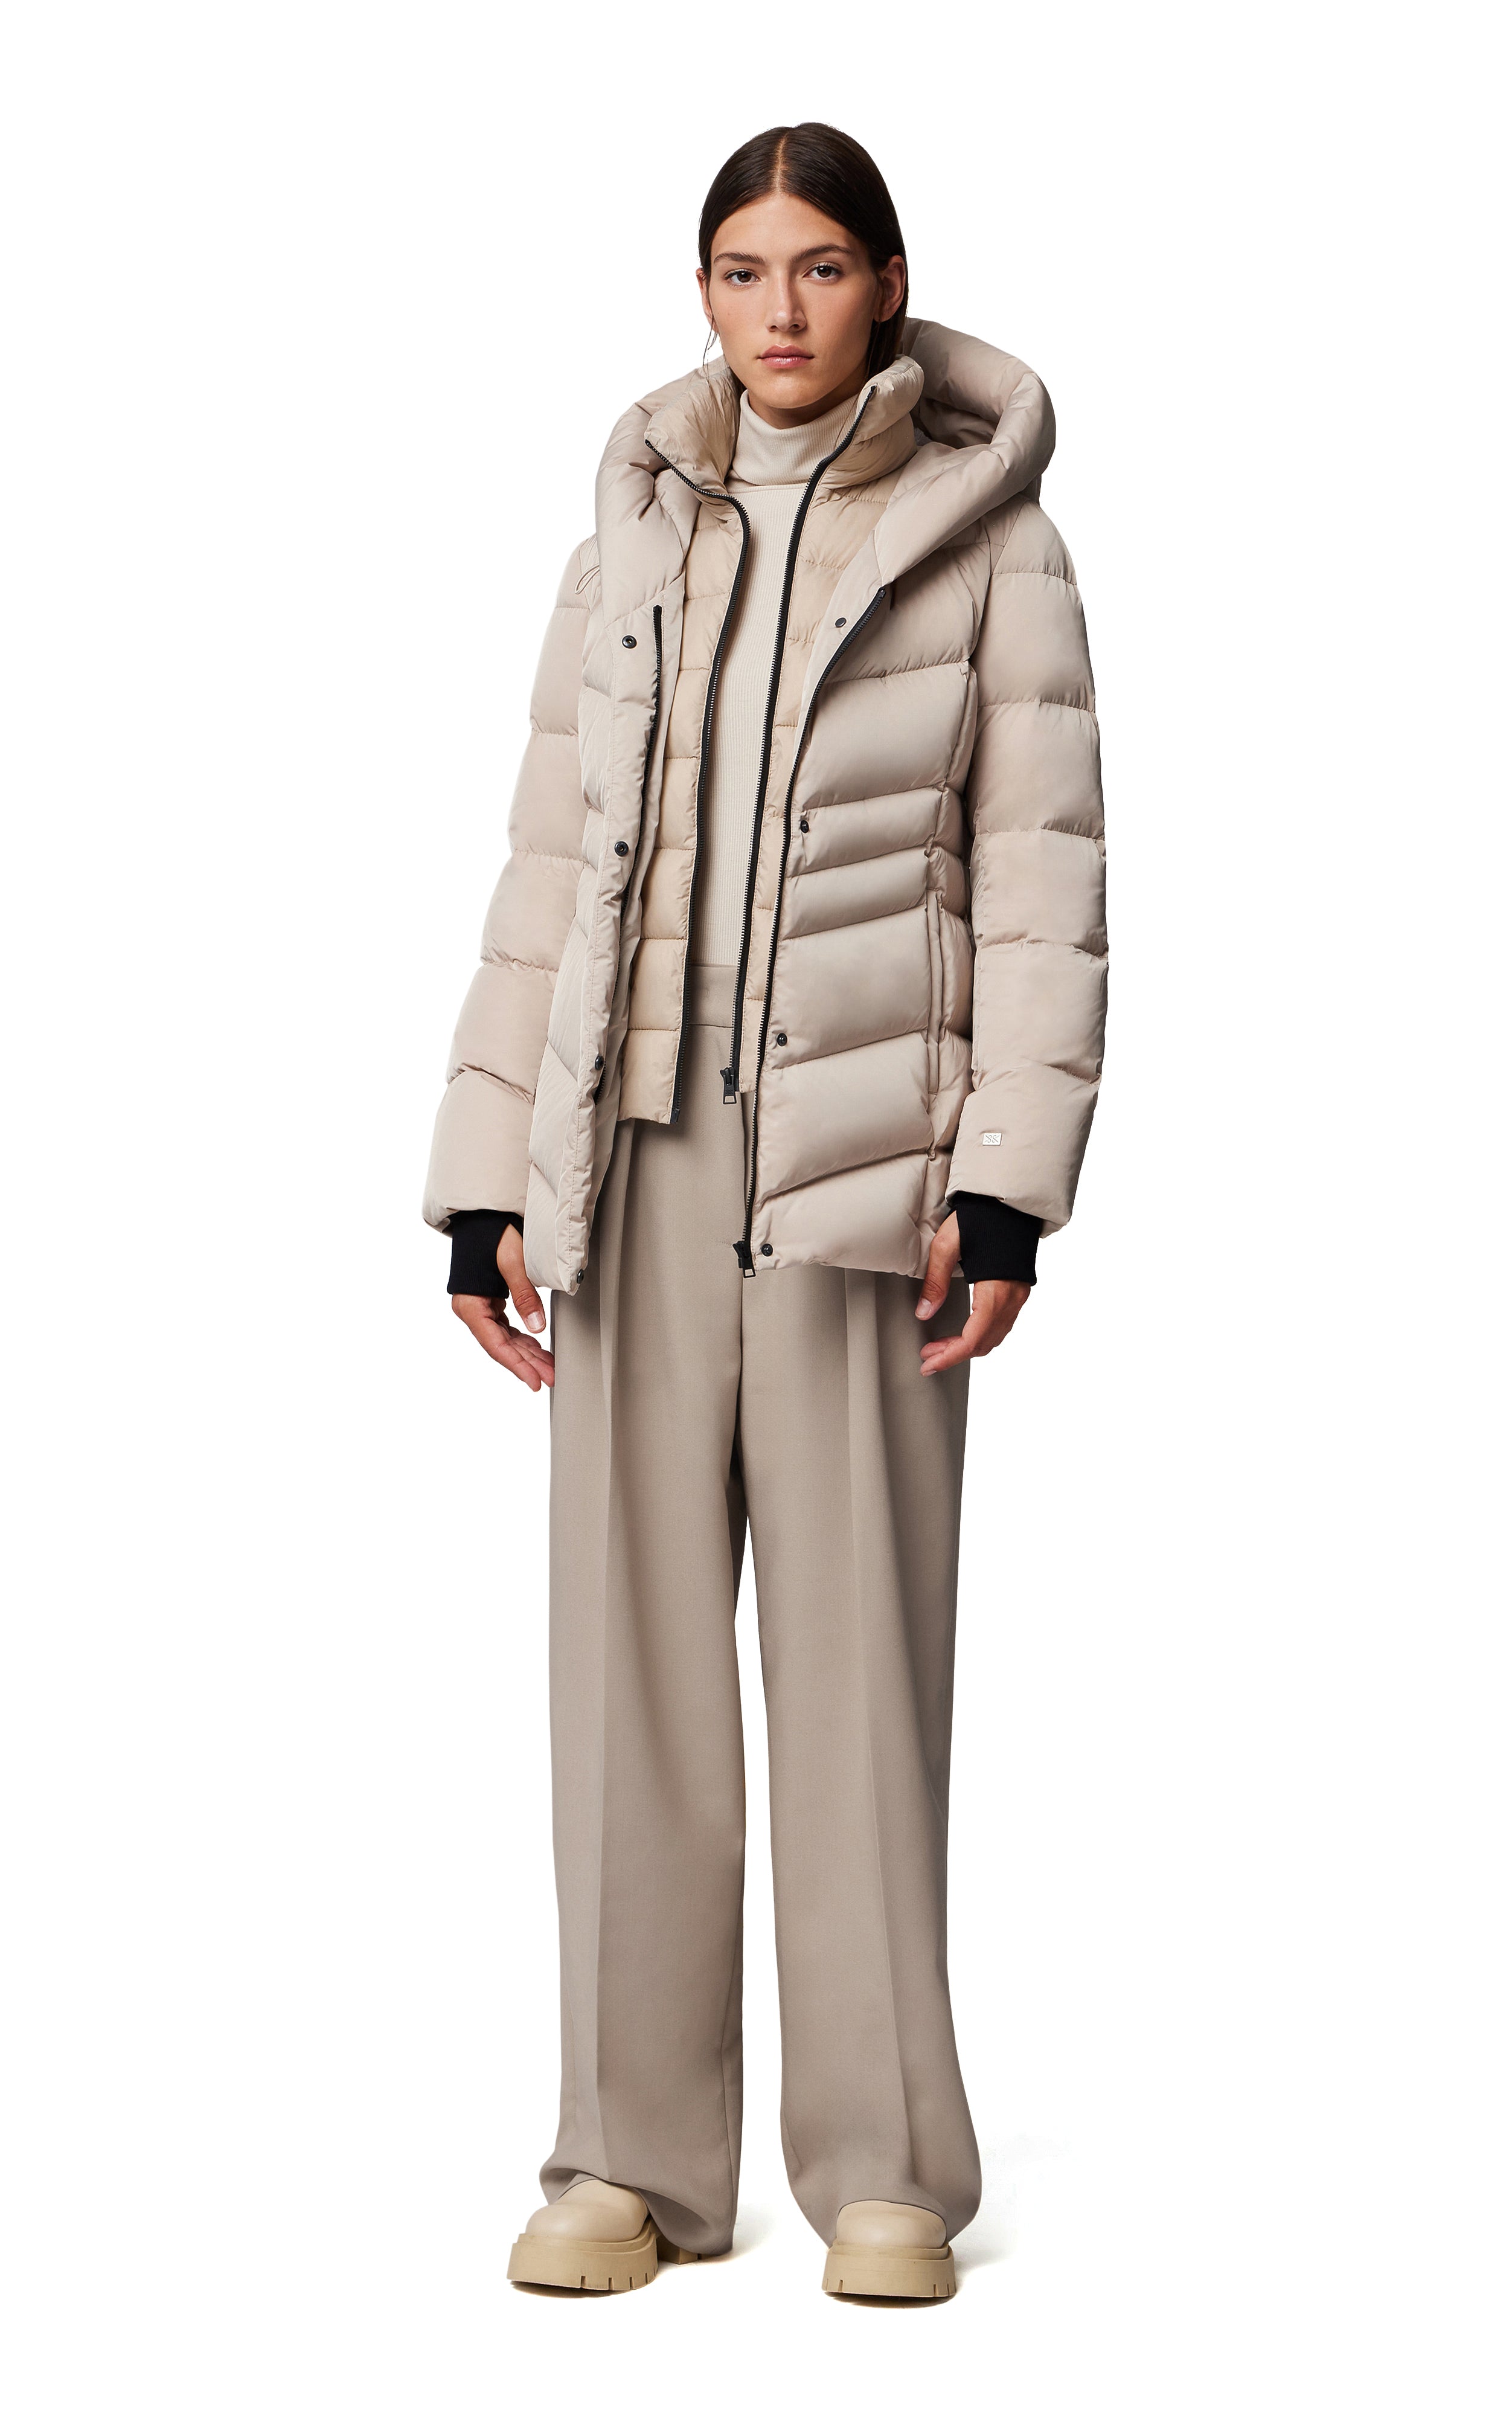 side view of the tallia mid length hooded parka in beige, unzipped and styled with tonal pants